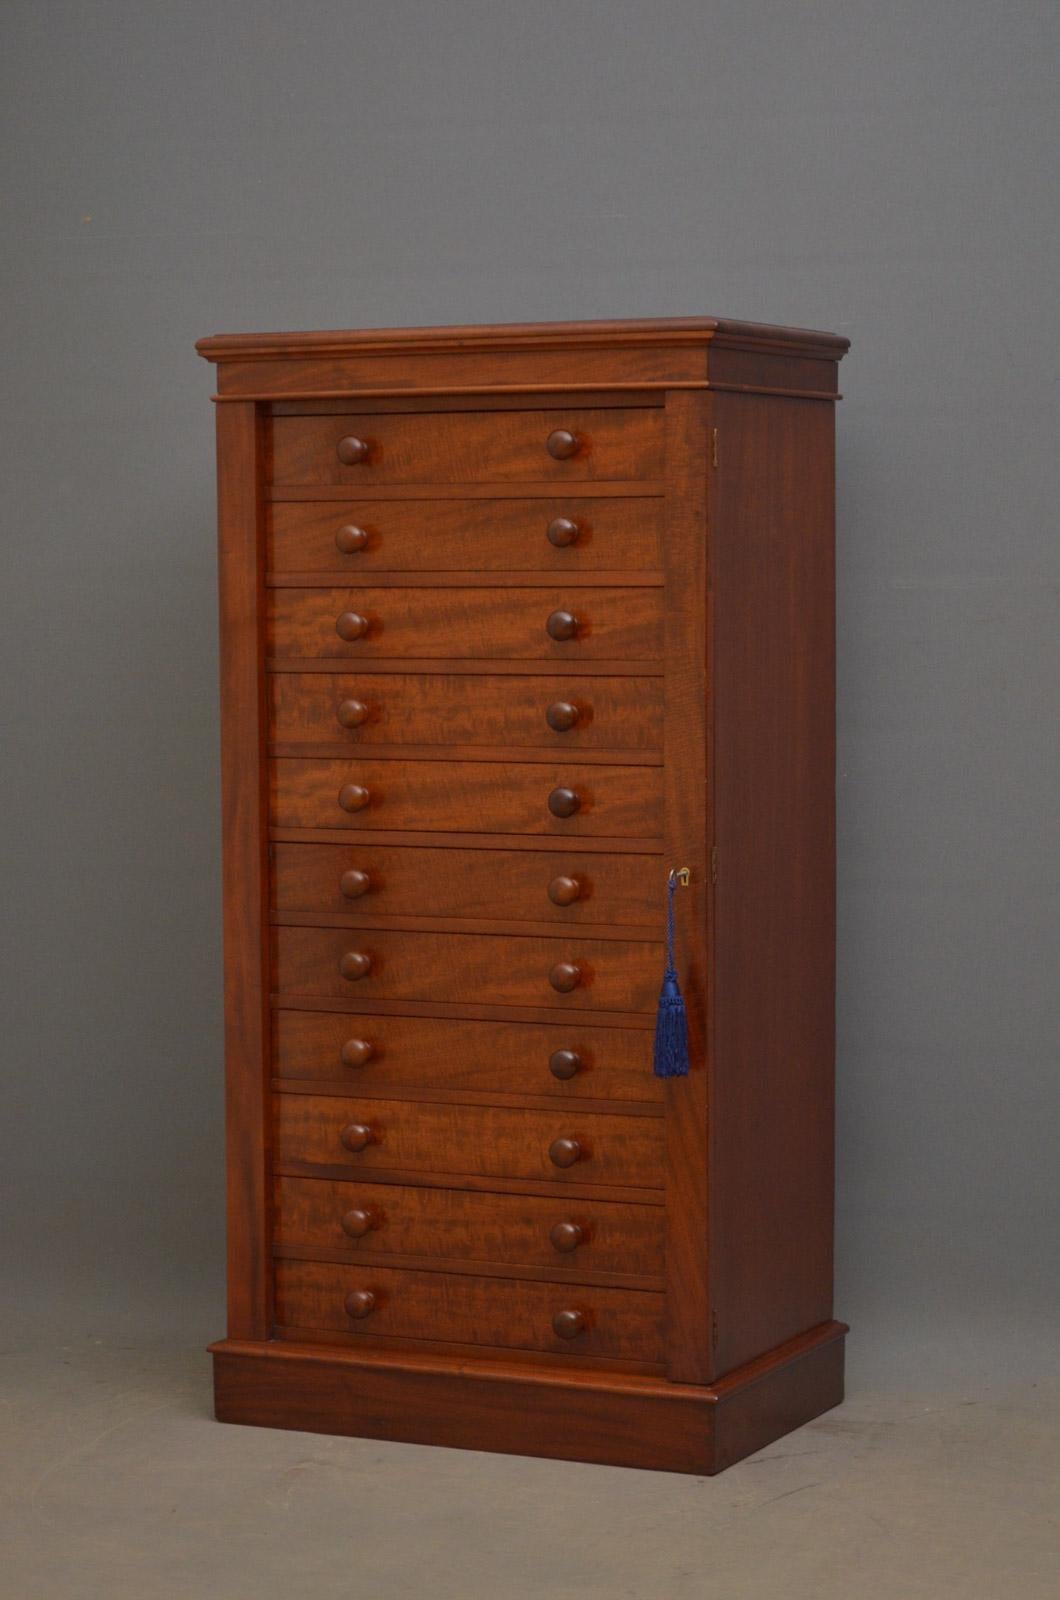 Sn4552 superb quality early Victorian collector's cabinet, having figured top with moulded top above 11 mahogany lined drawers, all fitted with original turned knobs and flanked by locking bard with original working lock and a key, standing on